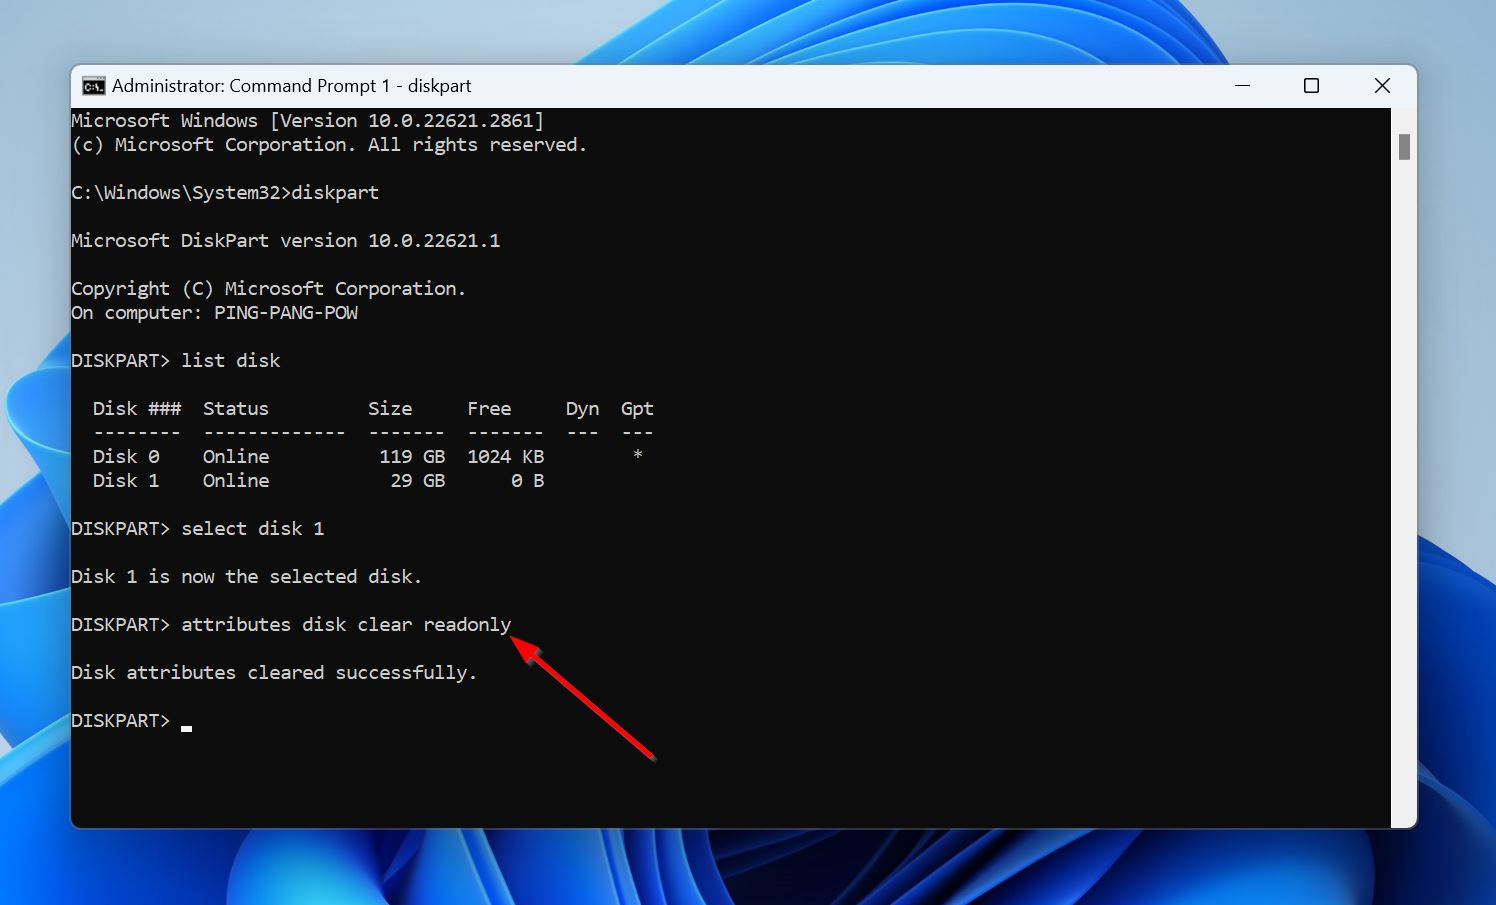 A screenshot of a command prompt window showing DiskPart tool commands. A 'list disk' command has been executed, displaying two disks, followed by a 'select disk 1' command, and 'attributes disk clear readonly' command with a success message.